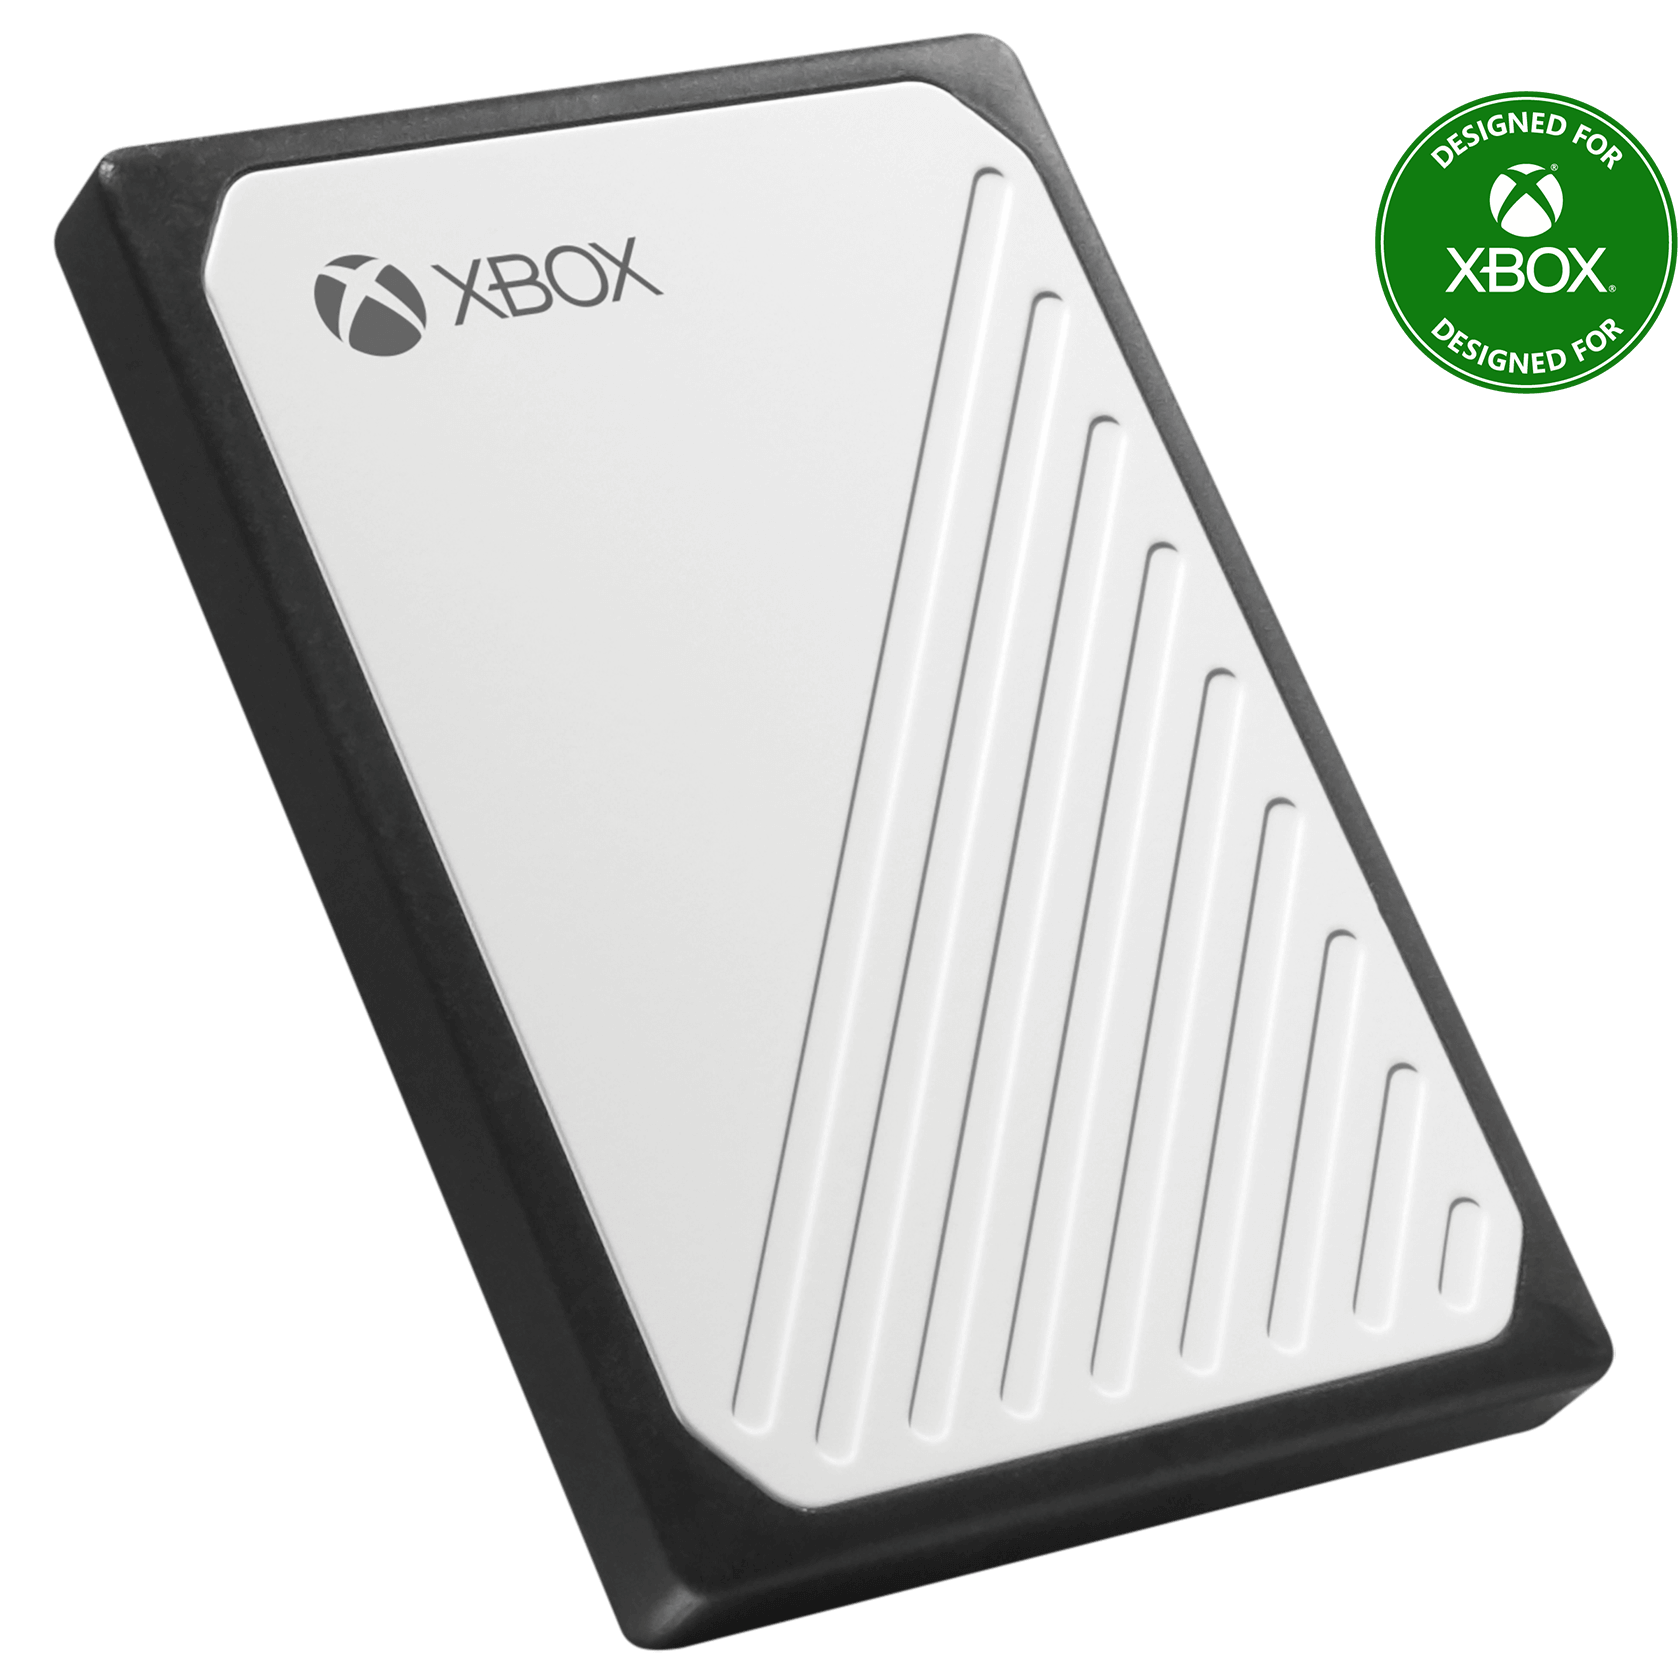 WD 1TB Gaming Drive Accelerated for Xbox One™ - WDBA4V0010BWB-WESN